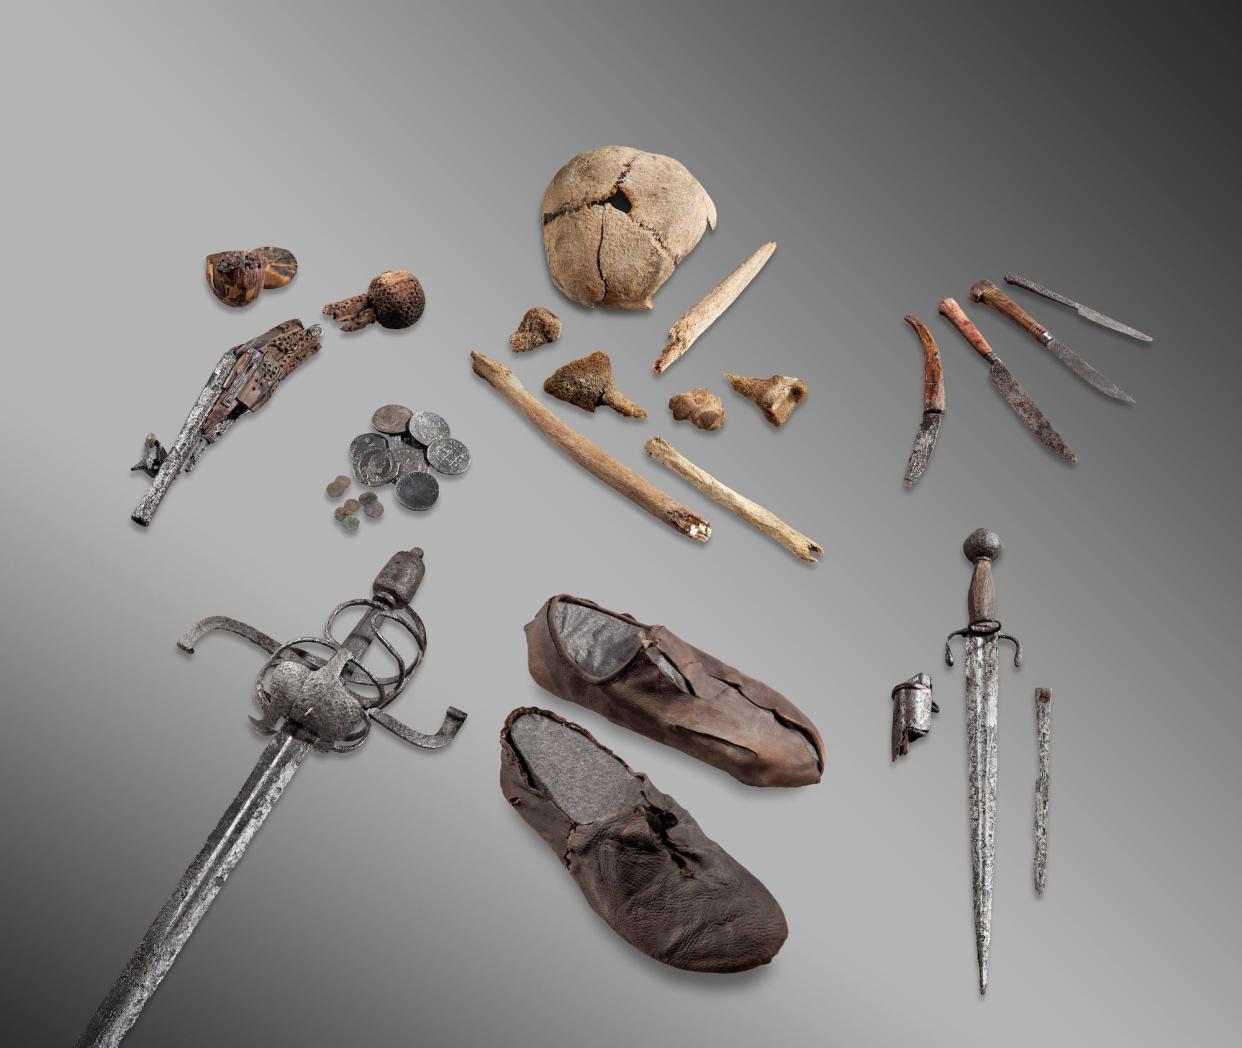 skull cap small bones rusty knives dagger sword coins broken pistol and worn leather shoes spread out on a grey background